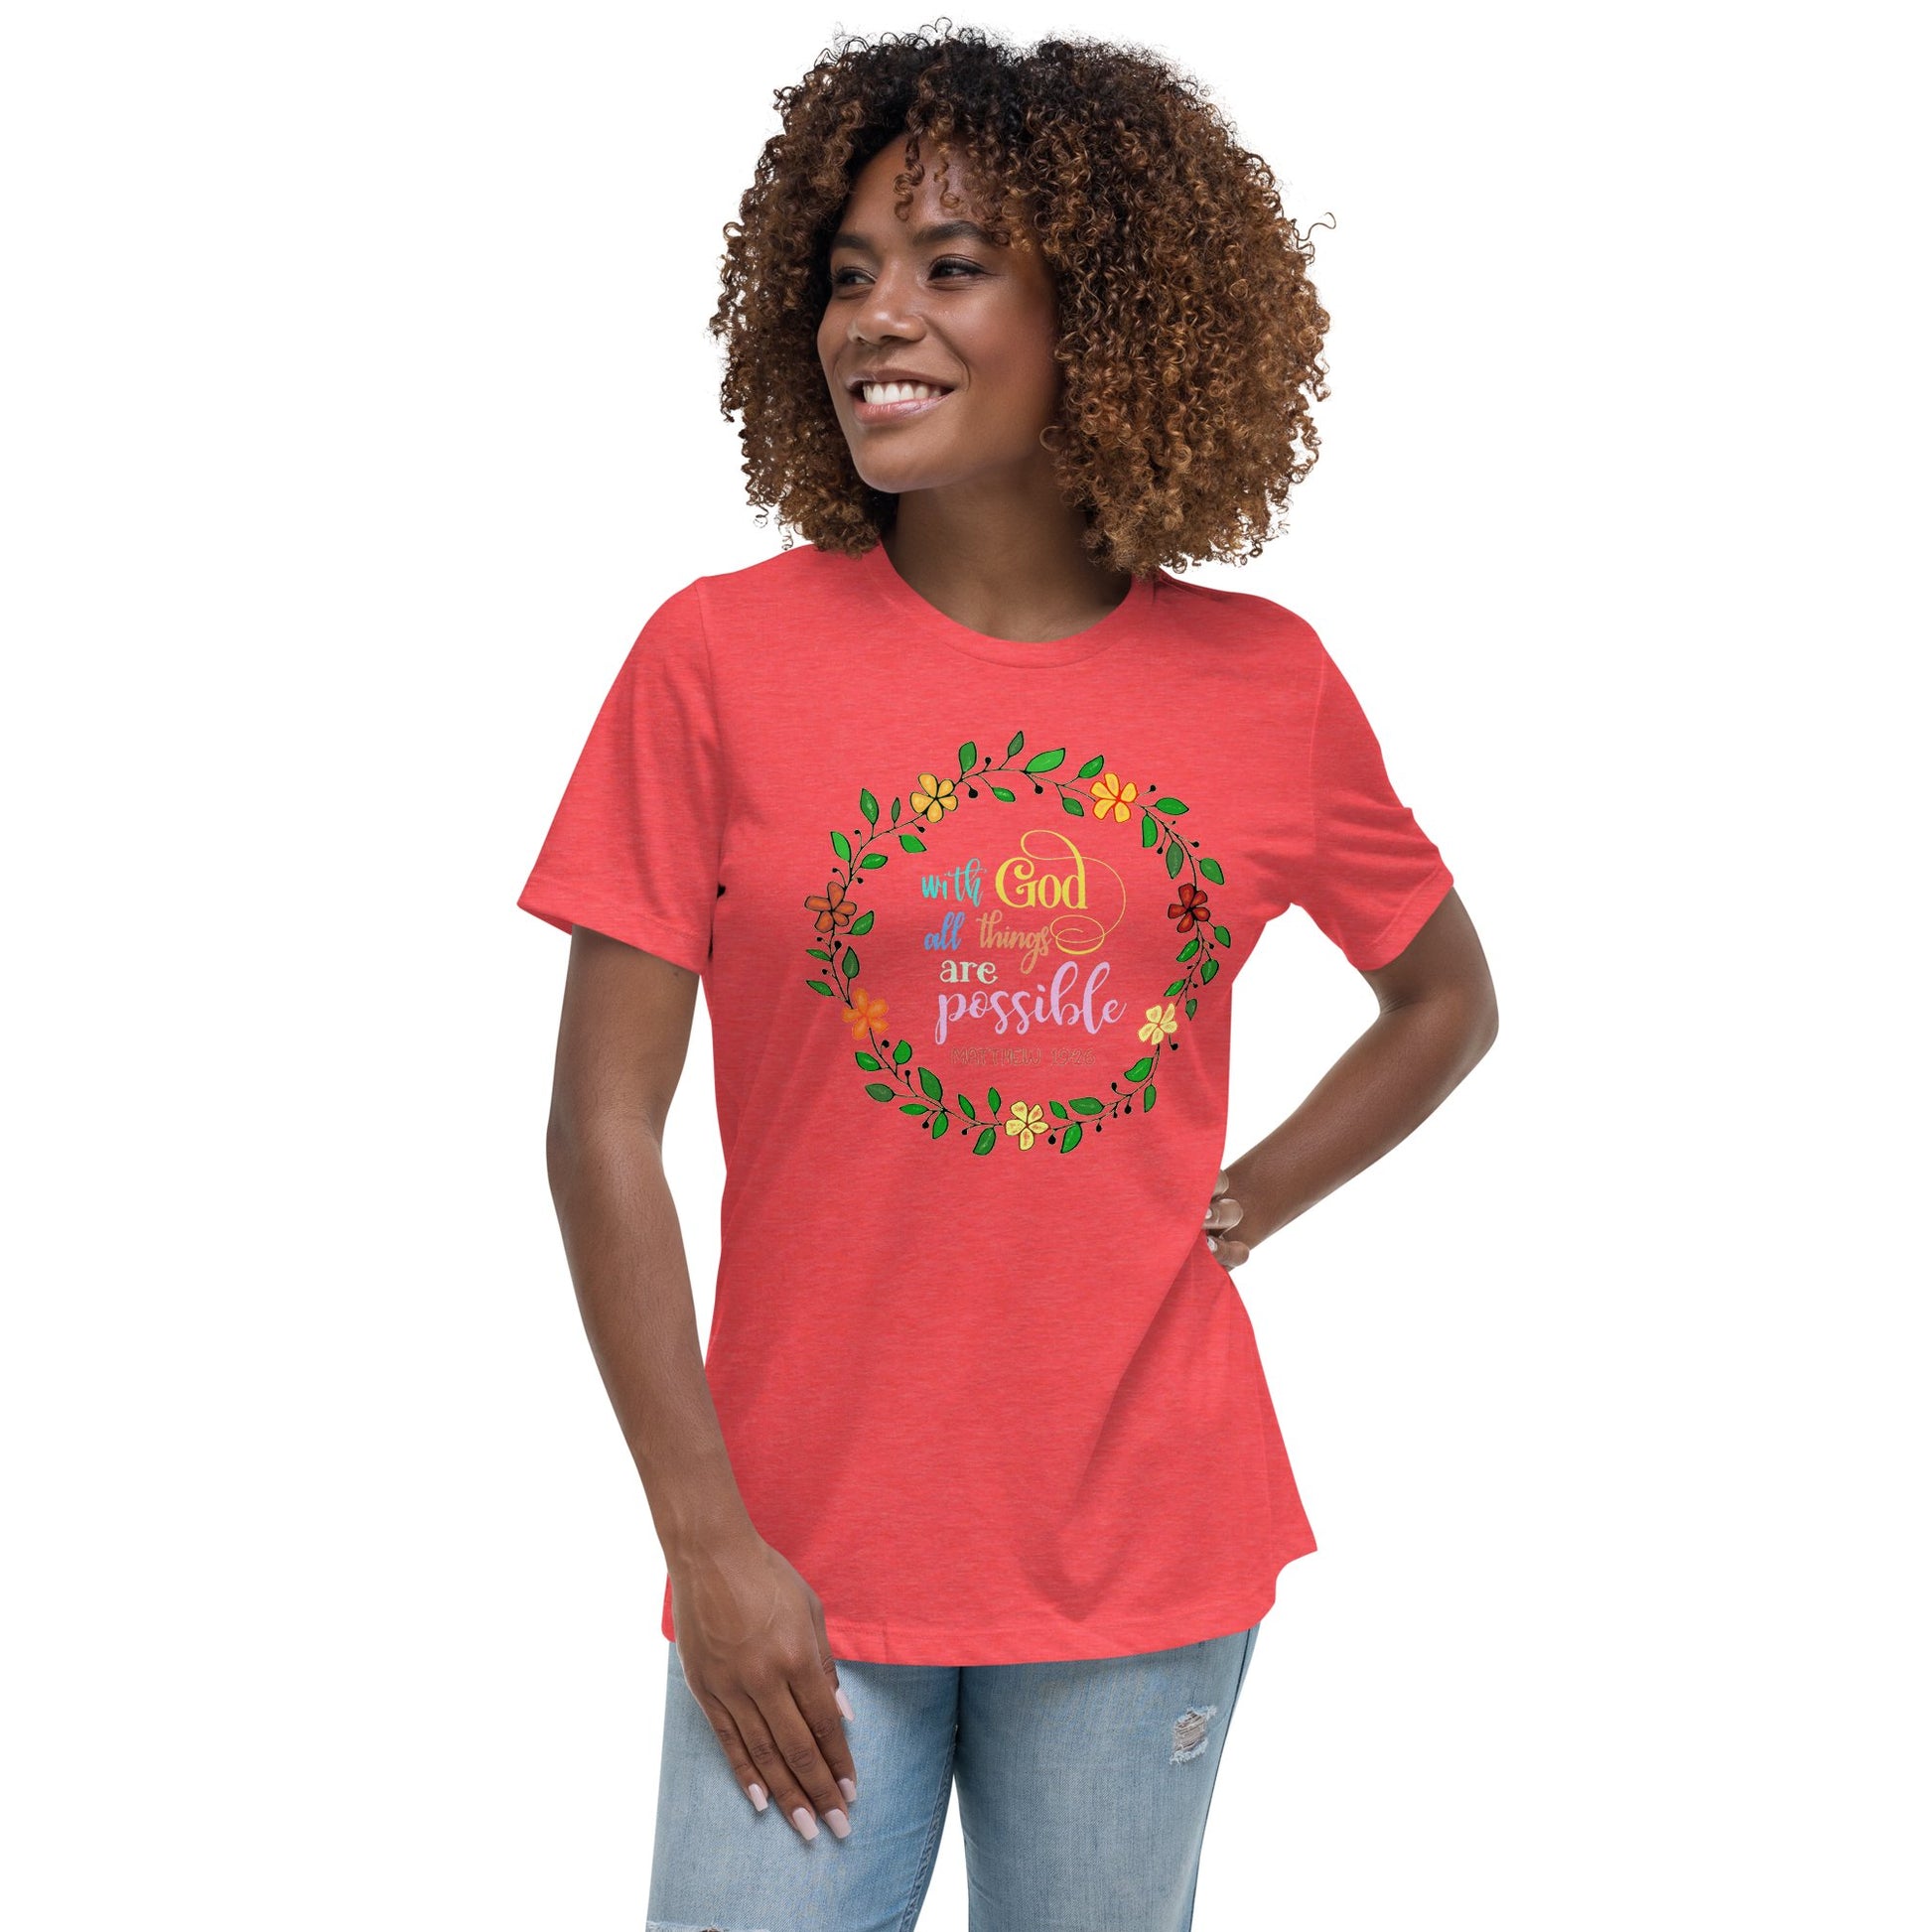 With God all things are possible Relaxed T-Shirt - Blue Cava